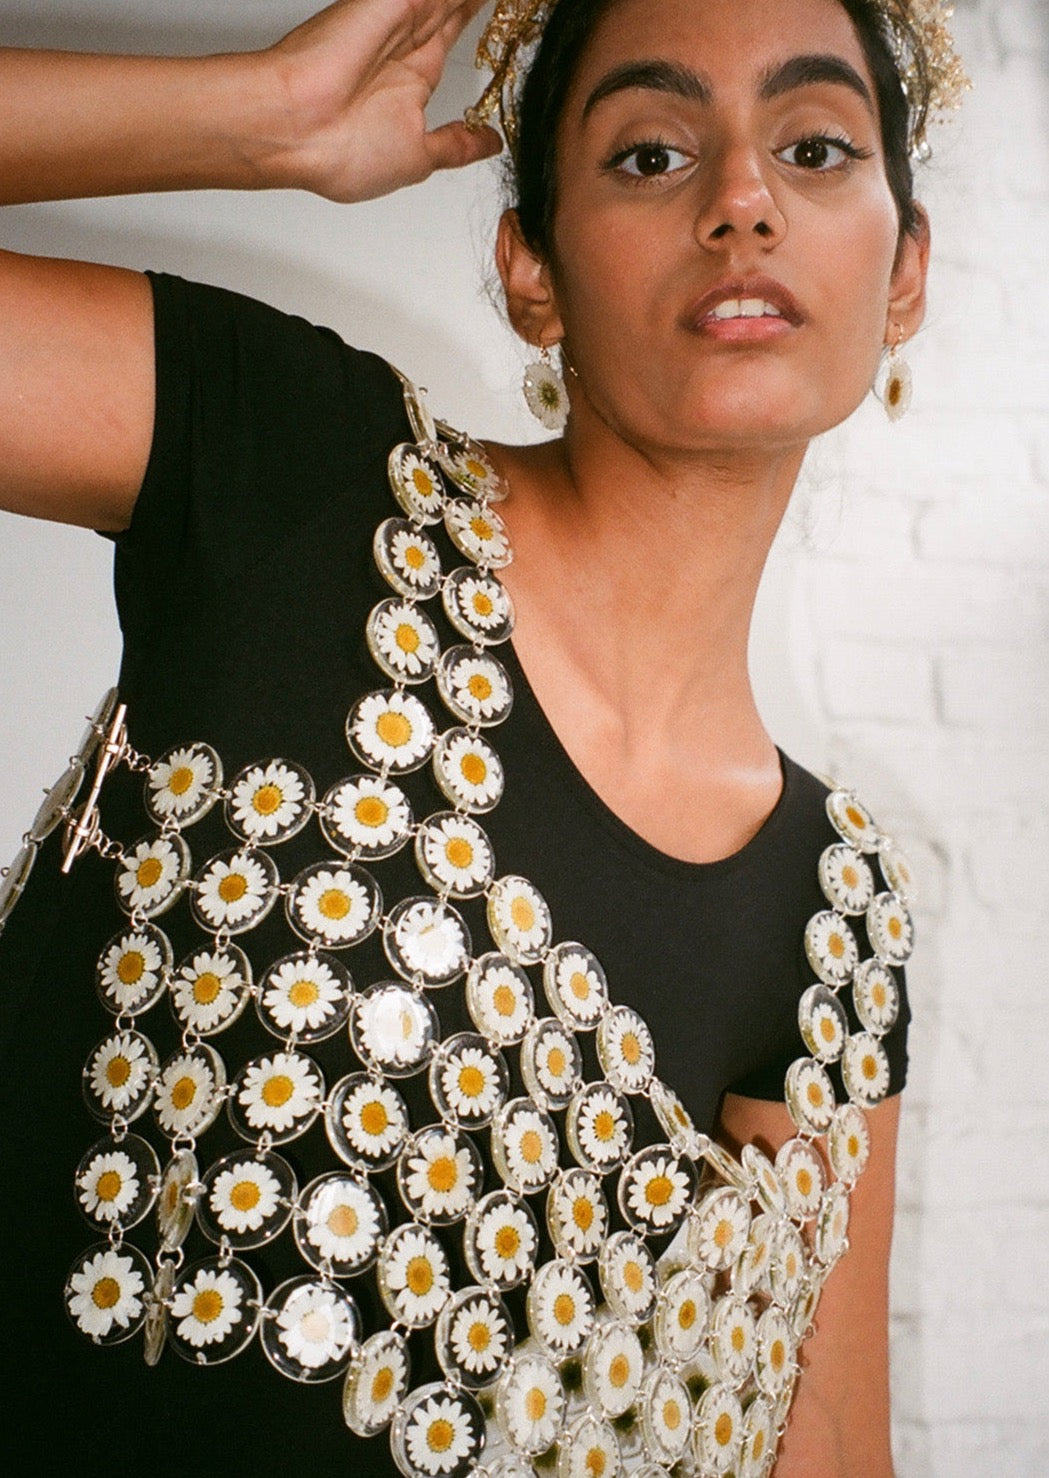 Our floral chainmaille is a distinctive technique where hundreds of preserved botanicals are intricately assembled-- this top is crafted from over two hundred daisy flowers. Relaxed fit, antiqued silver toggle side closure for easy on/off. 